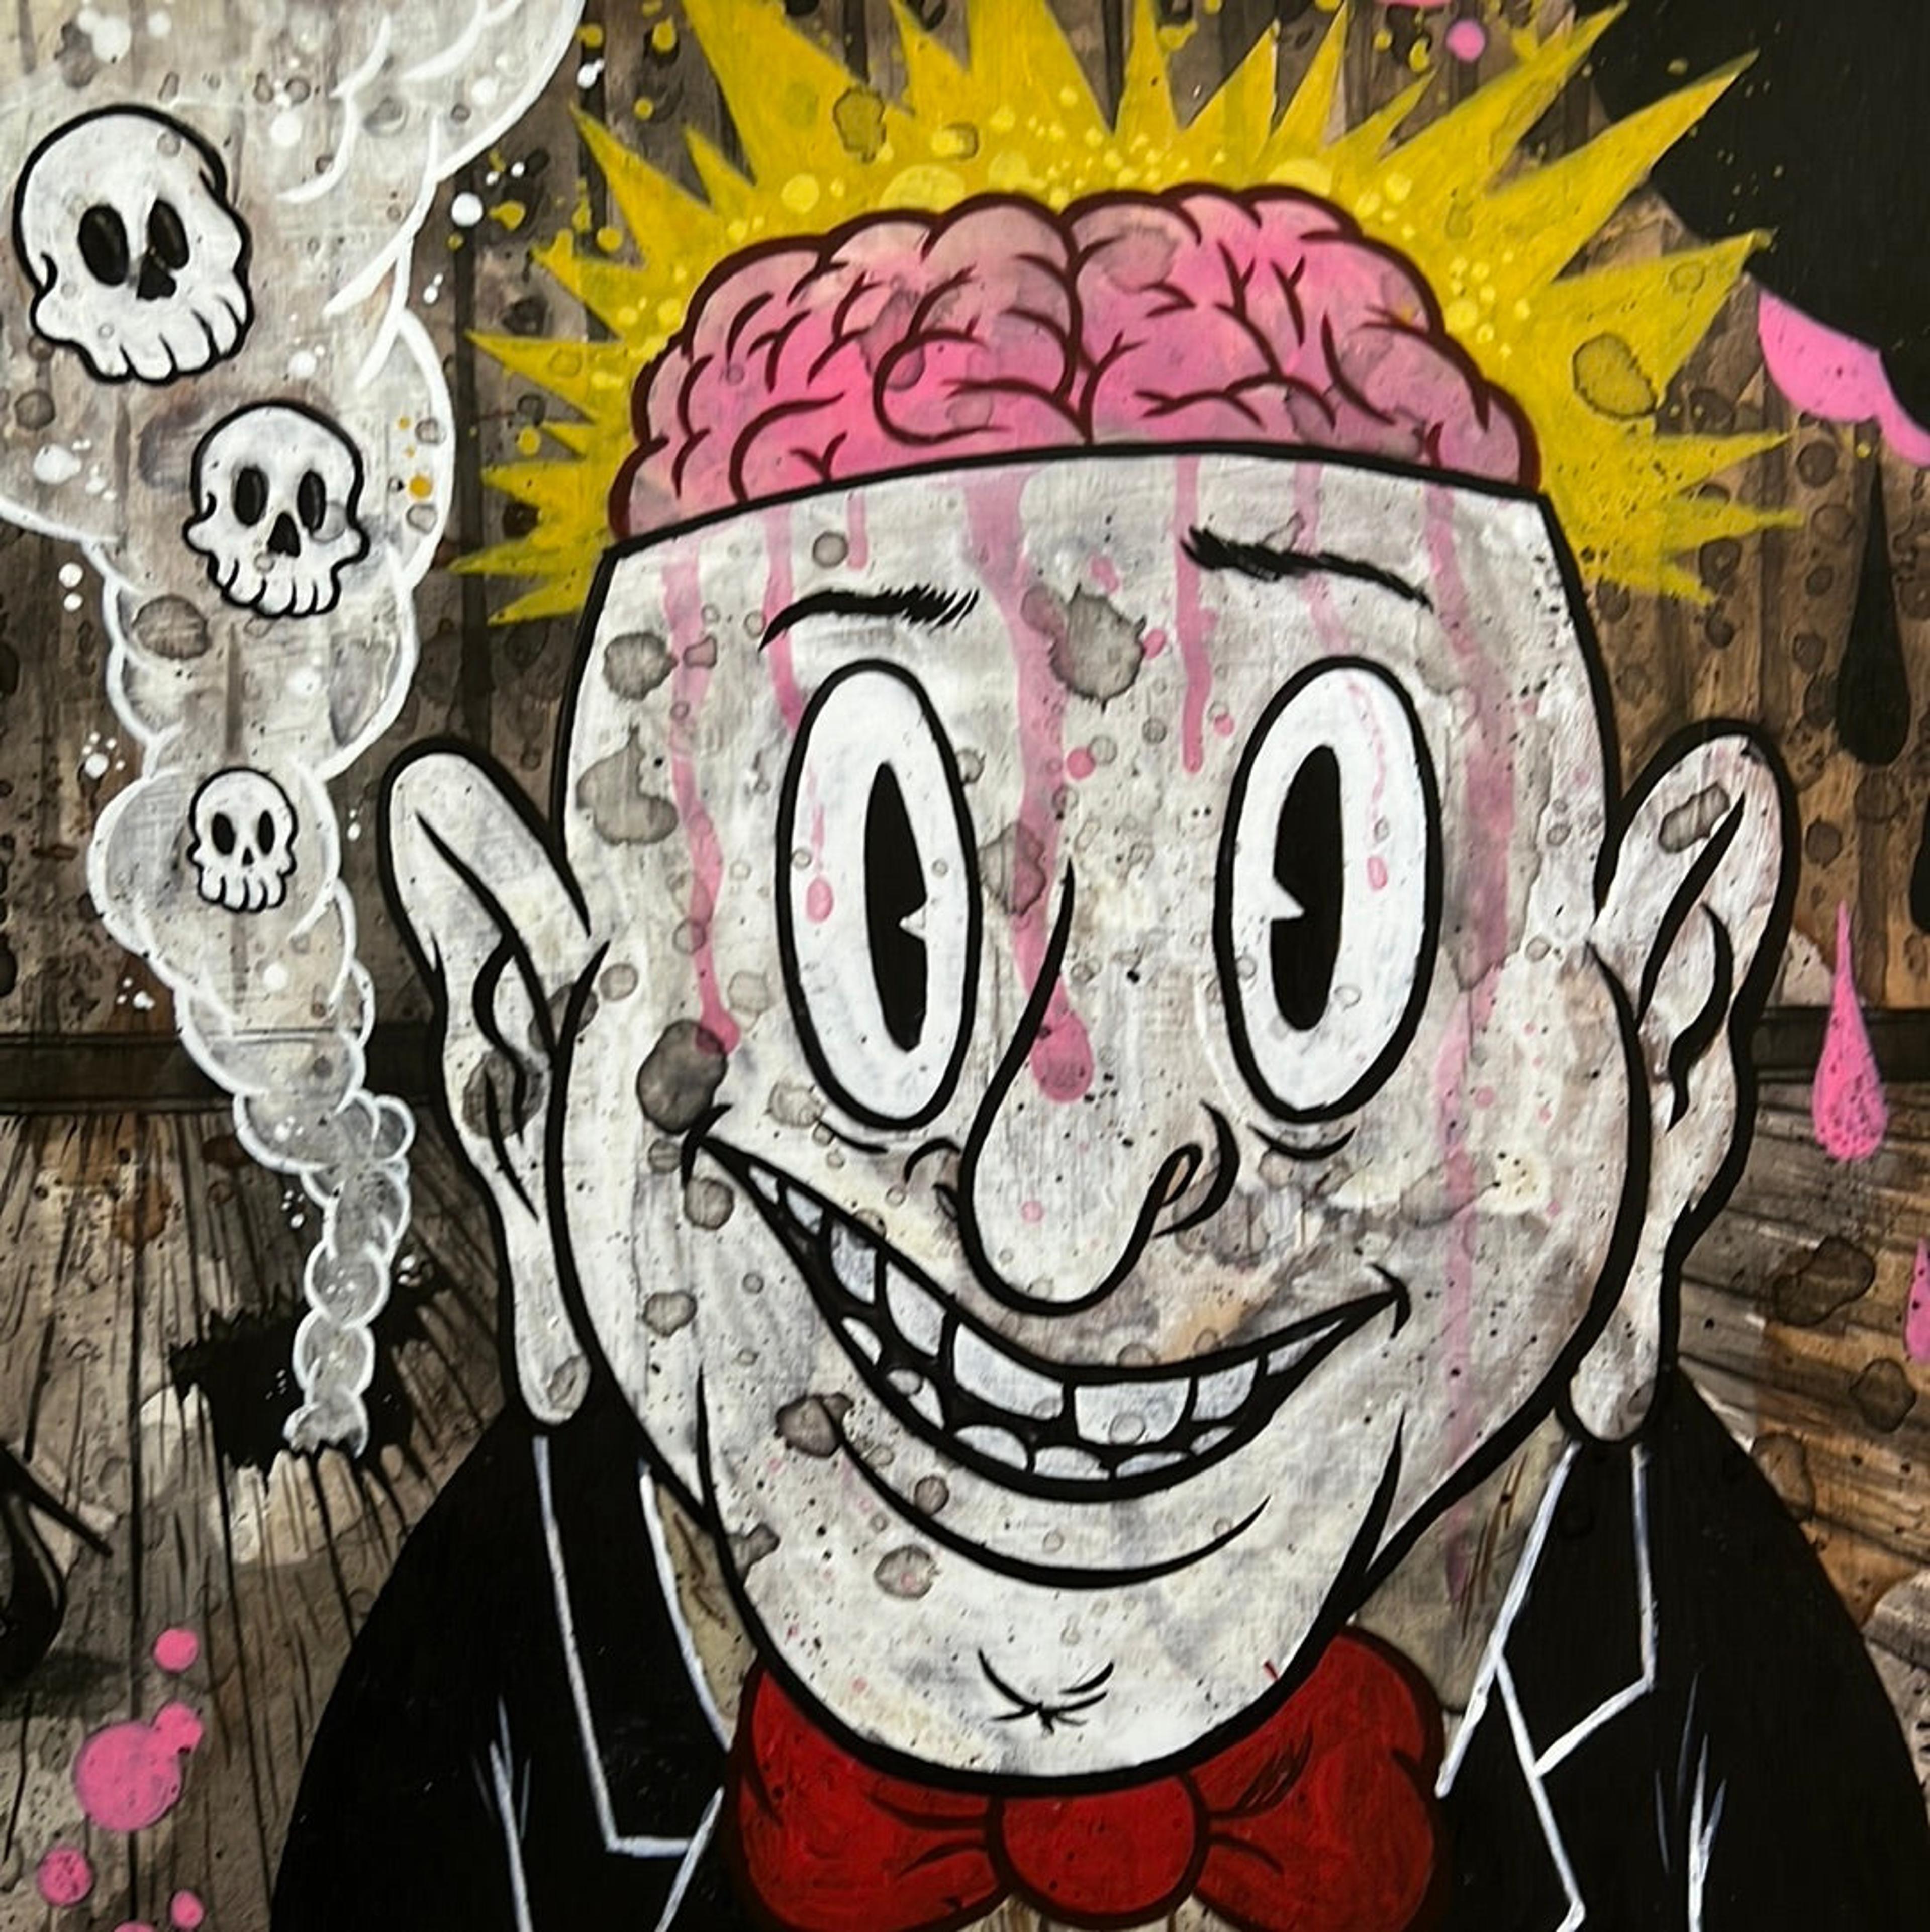 Alternate View 2 of “Mr. Brainy Head” by Frank Forte 12x15 signed Print